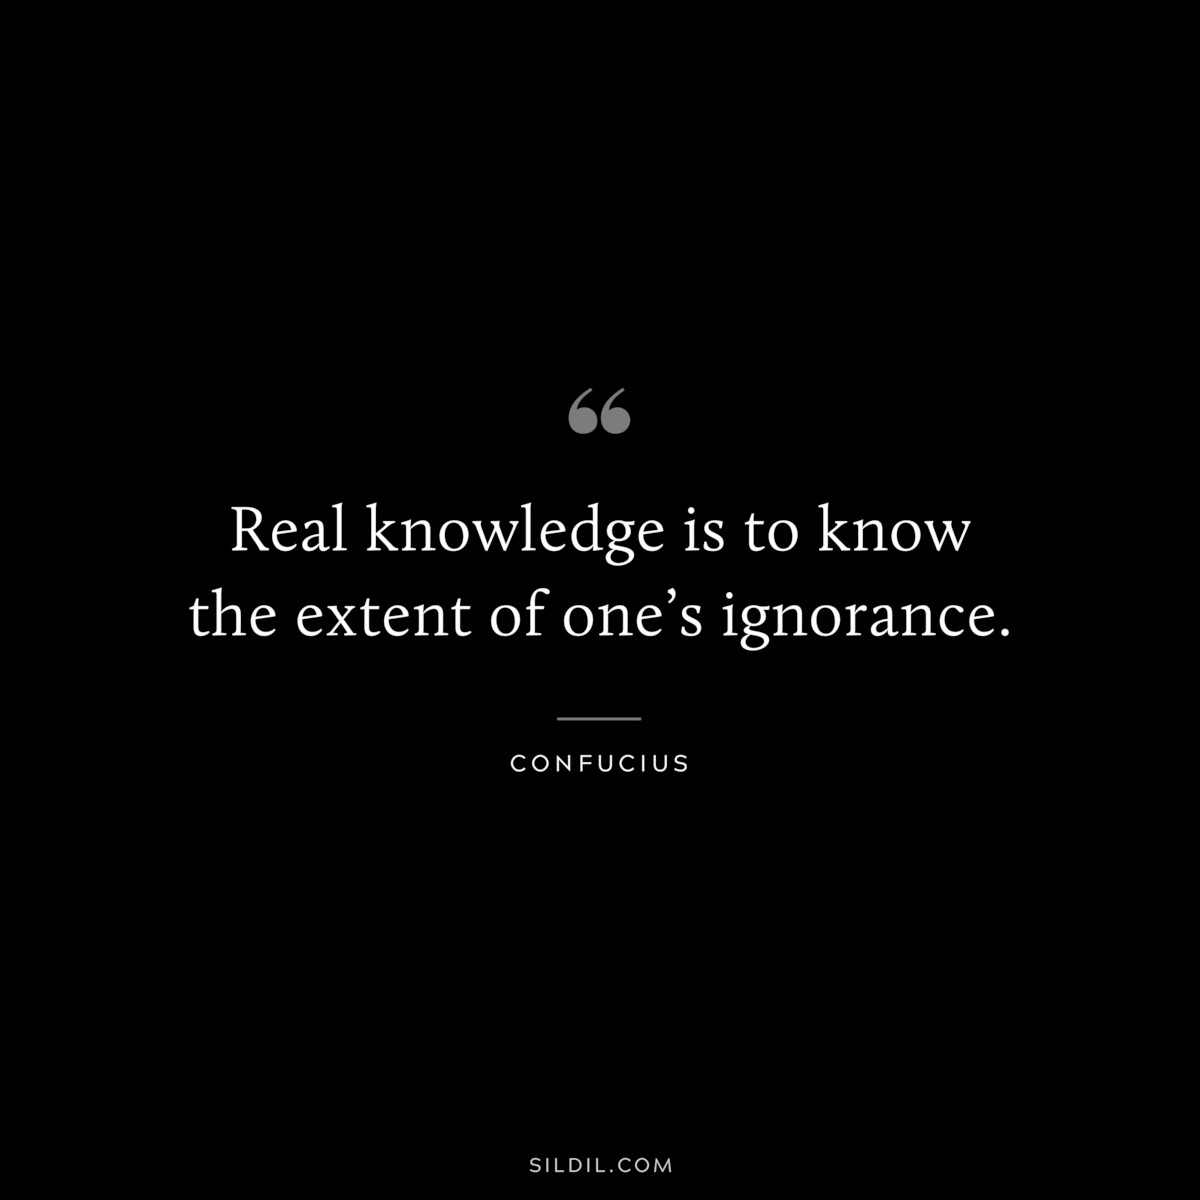 Real knowledge is to know the extent of one’s ignorance. ― Confucius